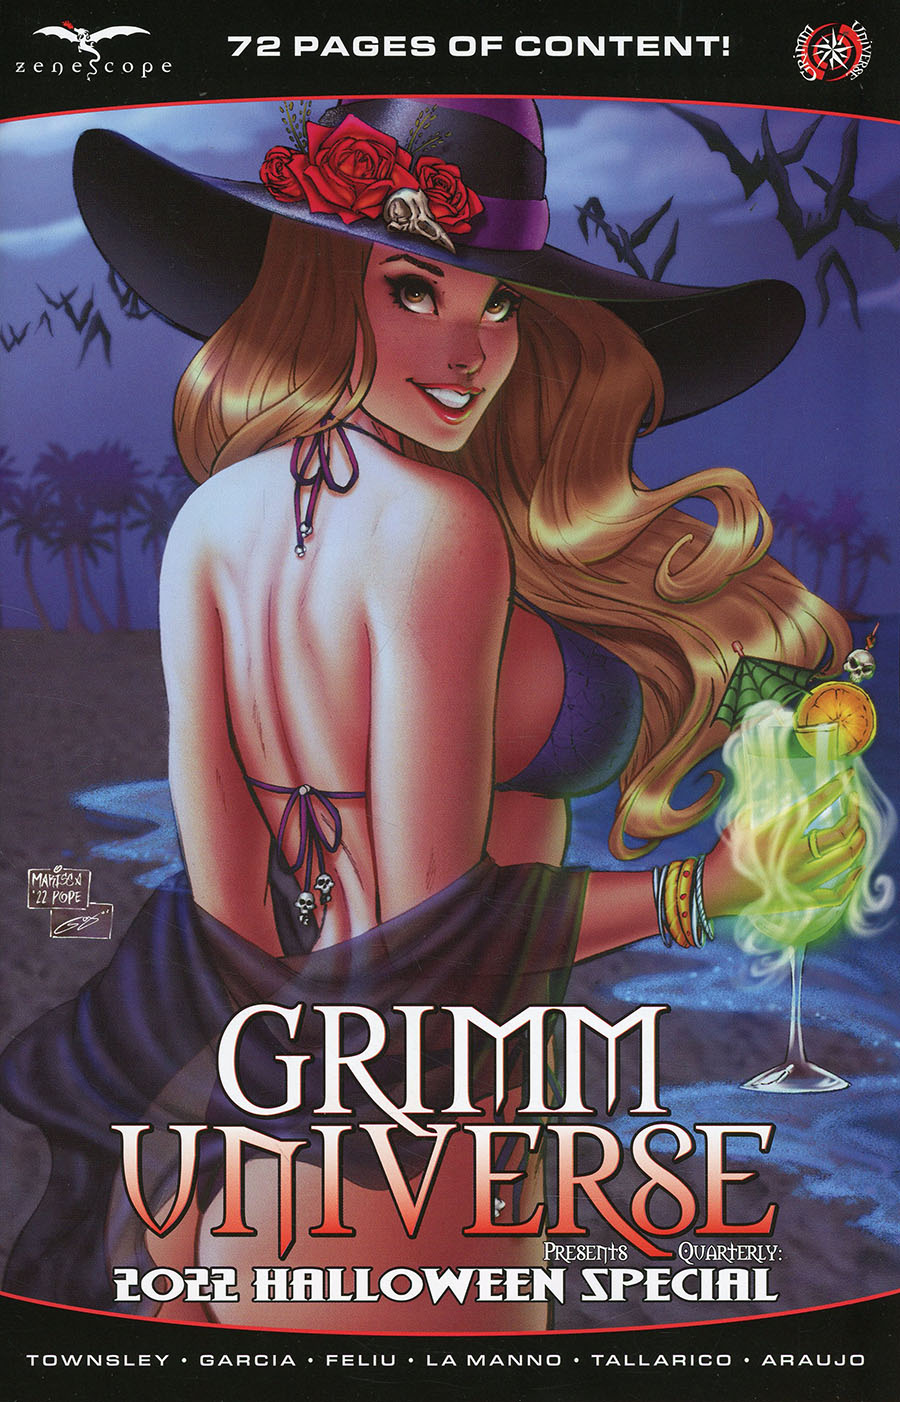 Grimm Fairy Tales Presents Grimm Universe Quarterly #8 2022 Halloween Special Cover D Marissa Pope